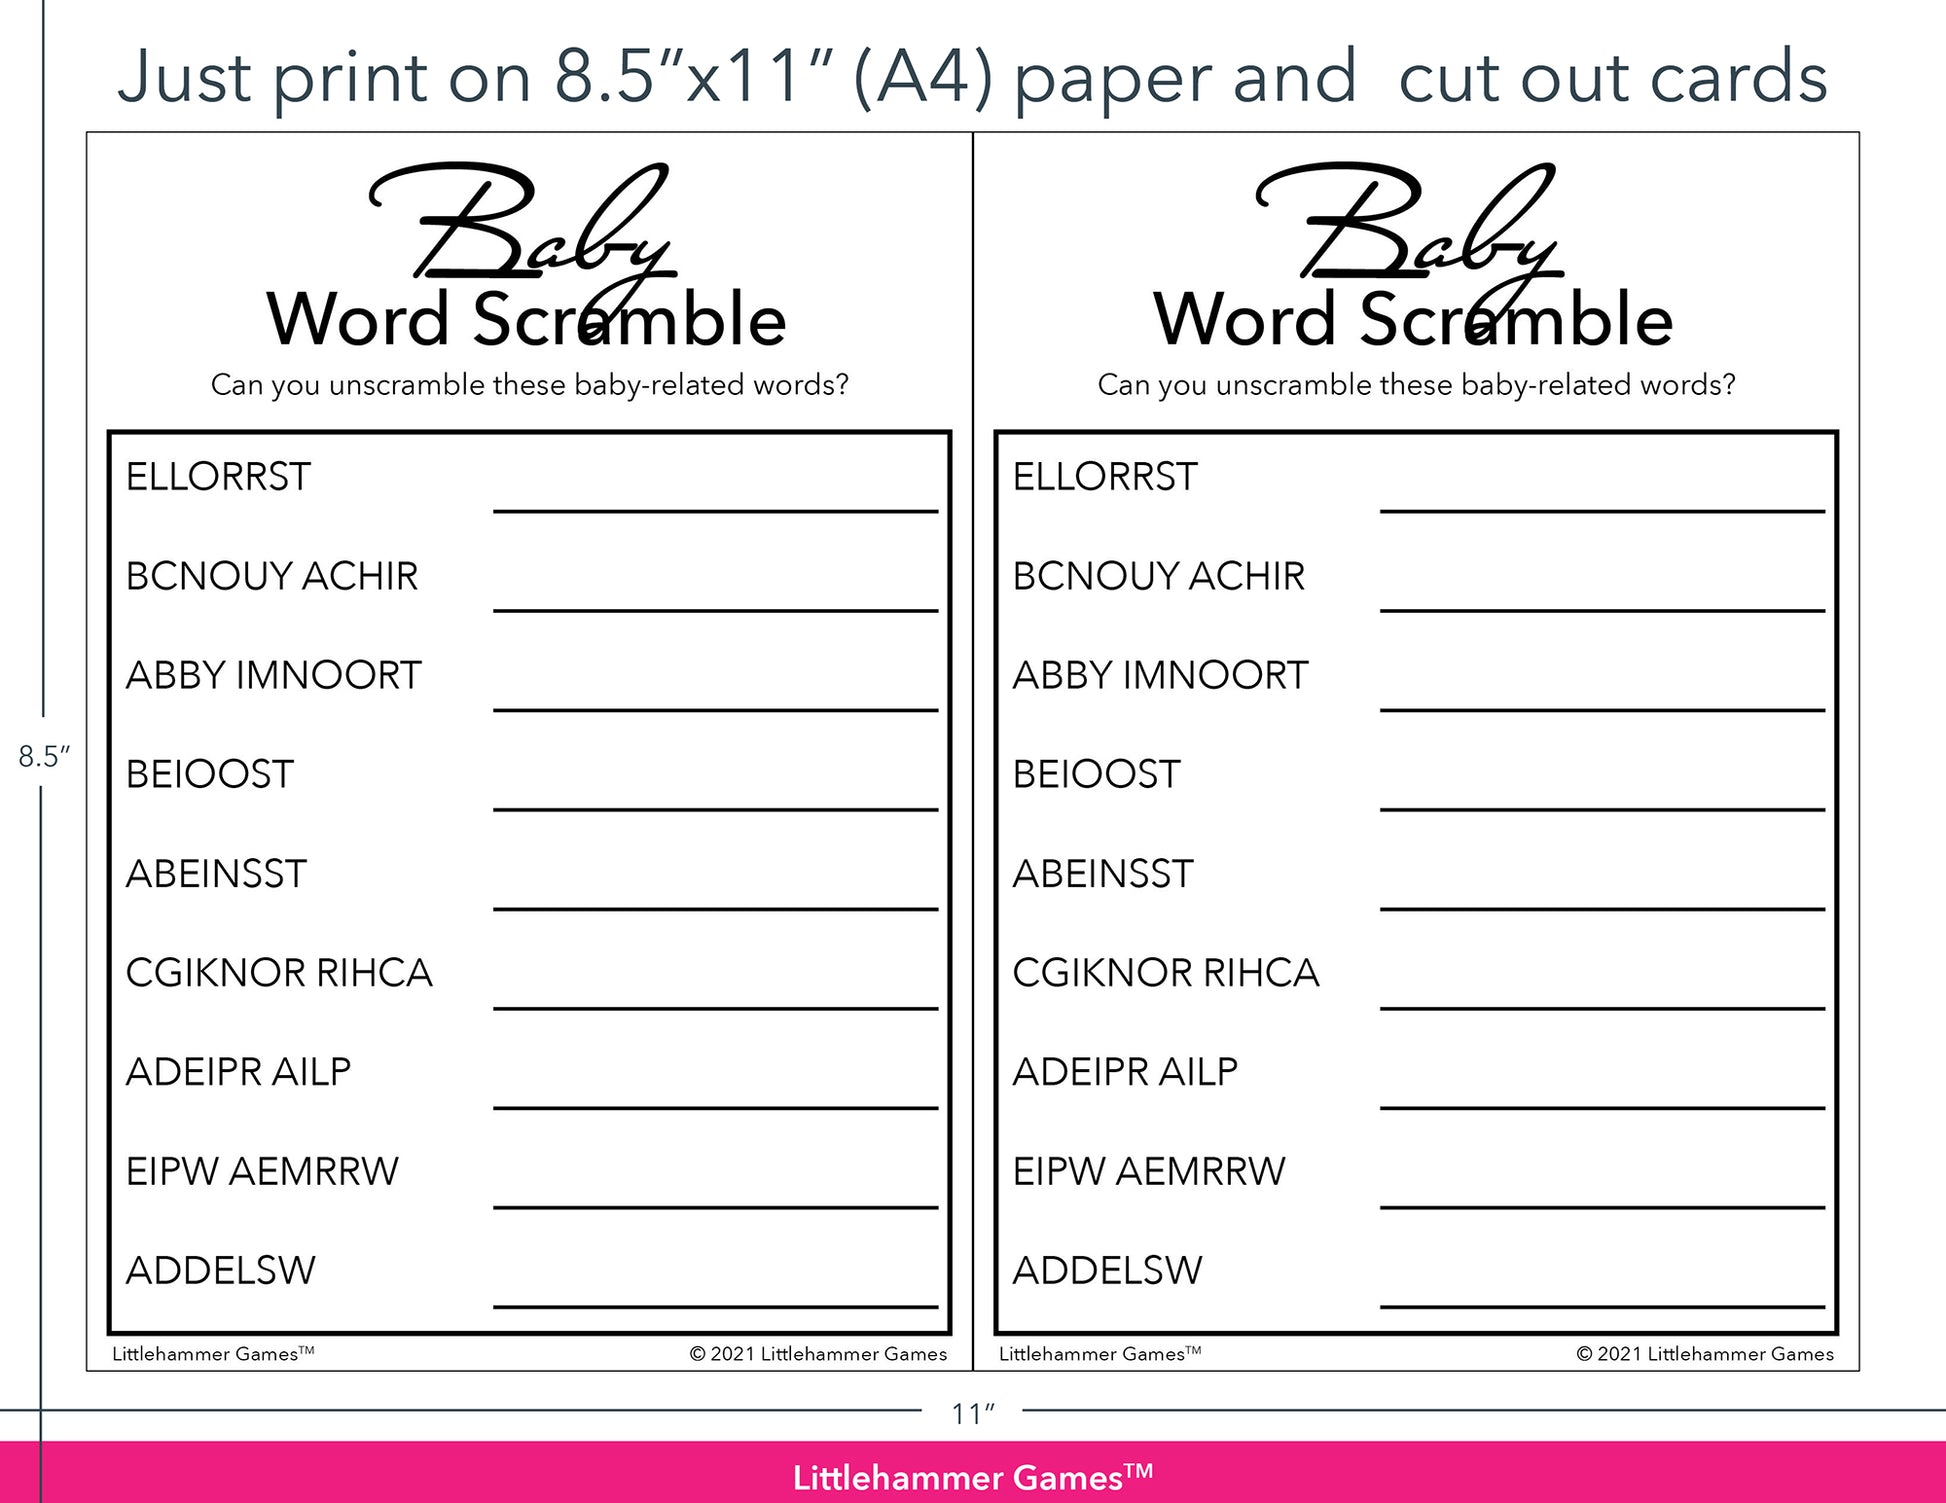 Baby Word Scramble black and white game cards with printing instructions